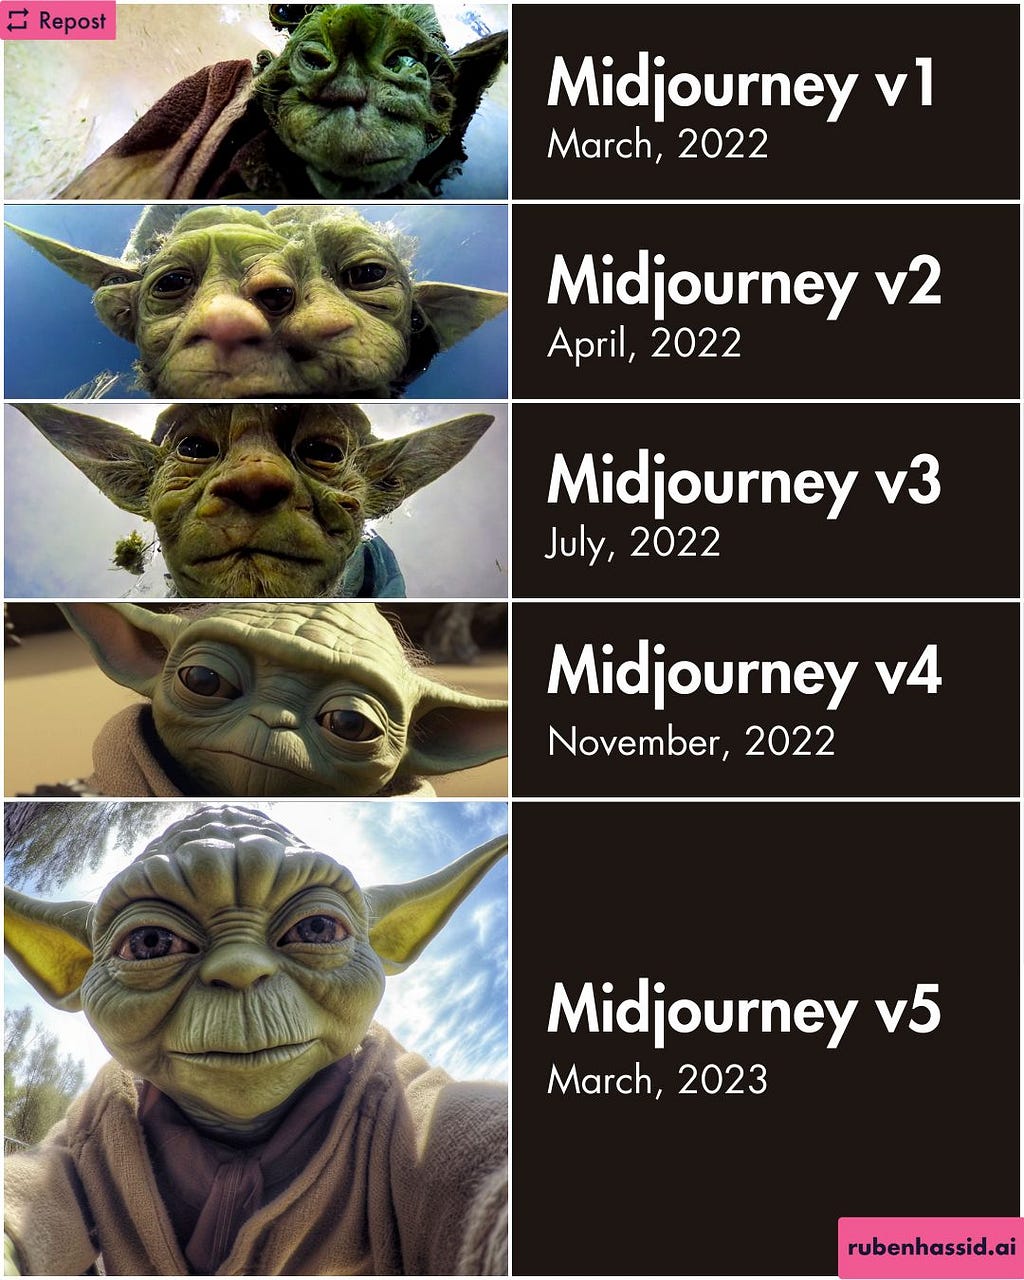 Yoda takes a selfie, as seen in each version of Midjourney. Remarkable progress in just over a year